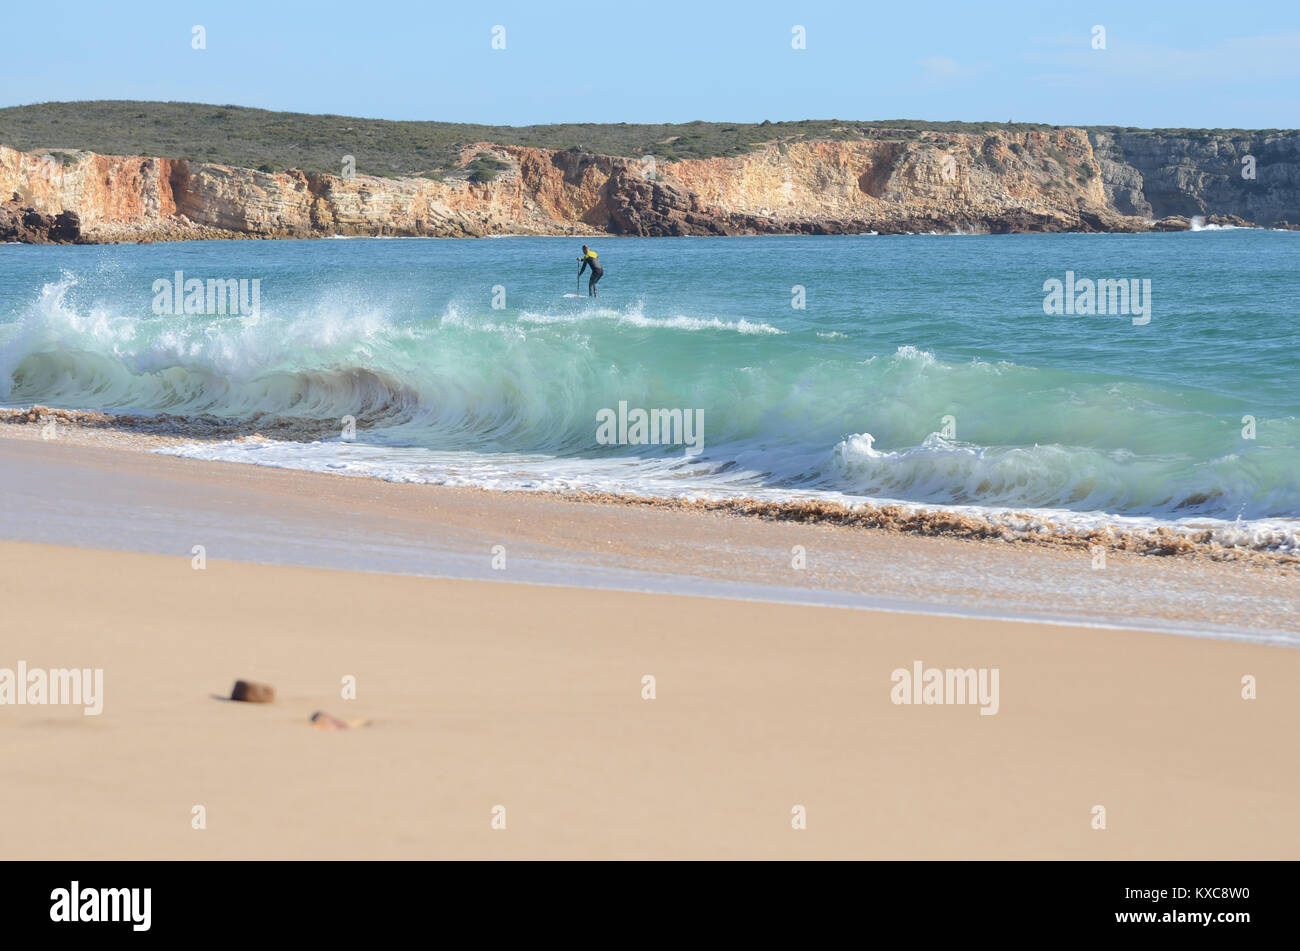 Beach with paddle boarder surfing waves Stock Photo